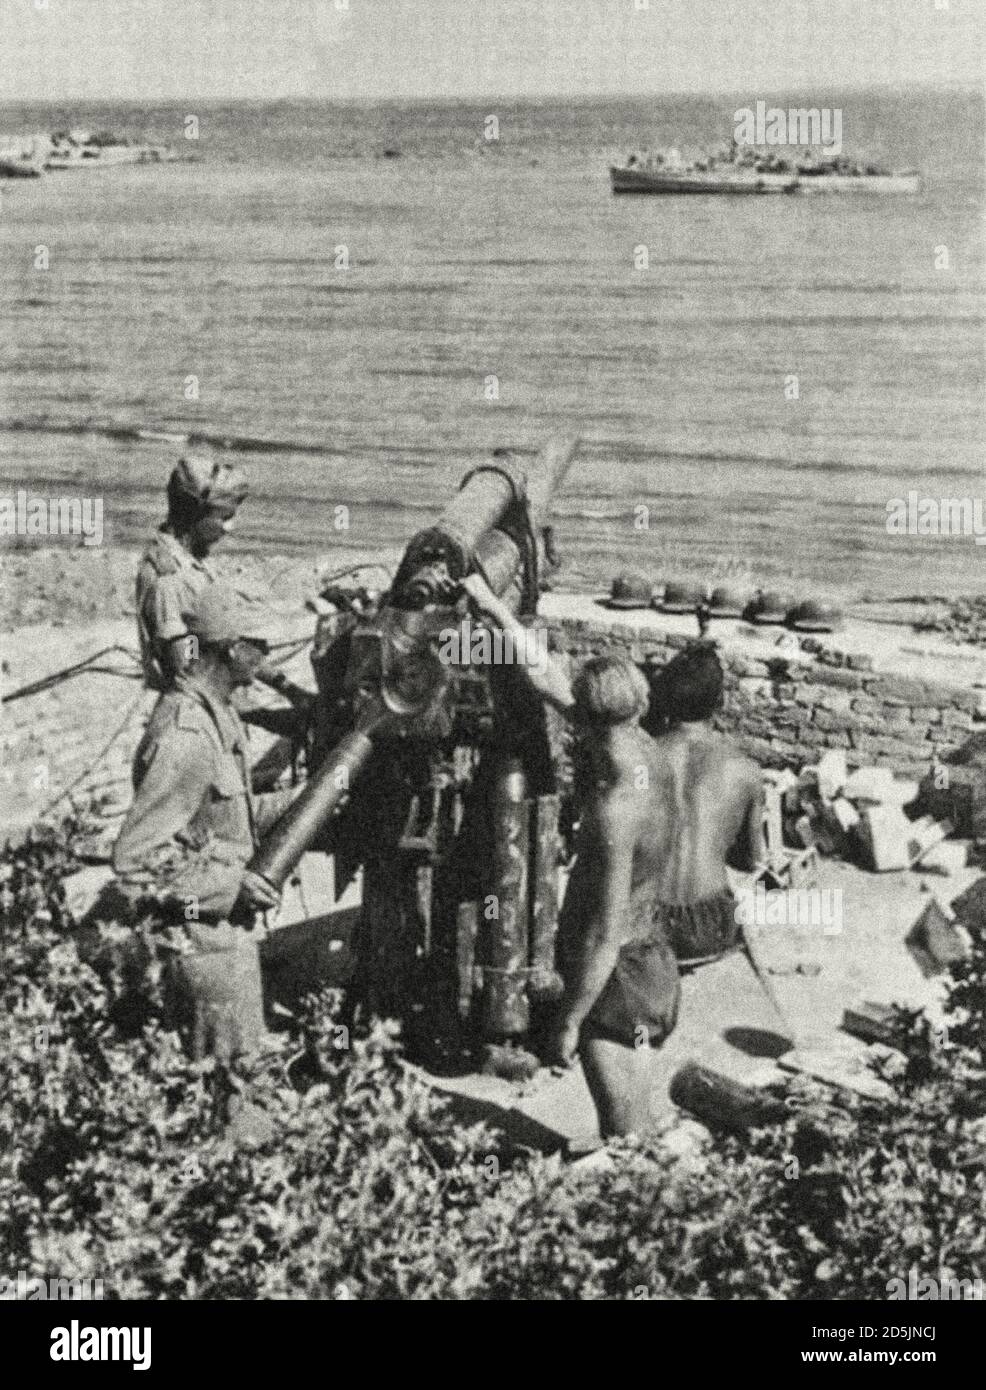 The German soldiers are using the captured Soviet 76.2-mm 3-K anti-aircraft gun of the 1931 model in Sevastopol. Sevastopol, Crimea, Russia. 1942 Stock Photo